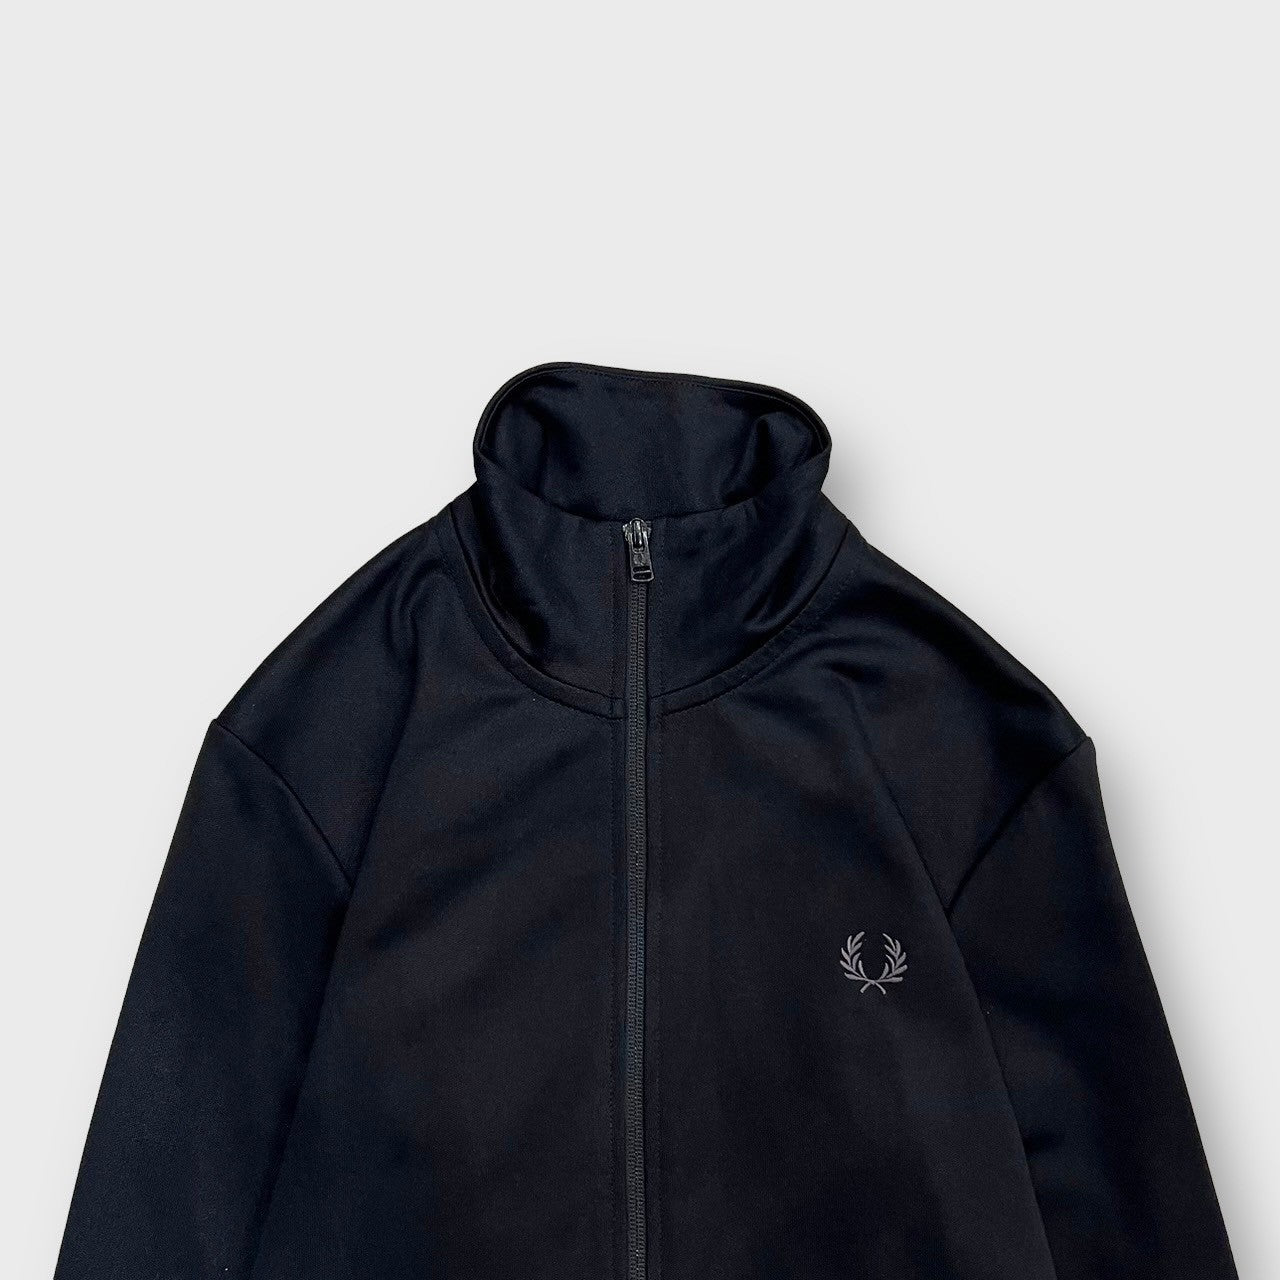 00's "FRED PERRY"
Track jacket